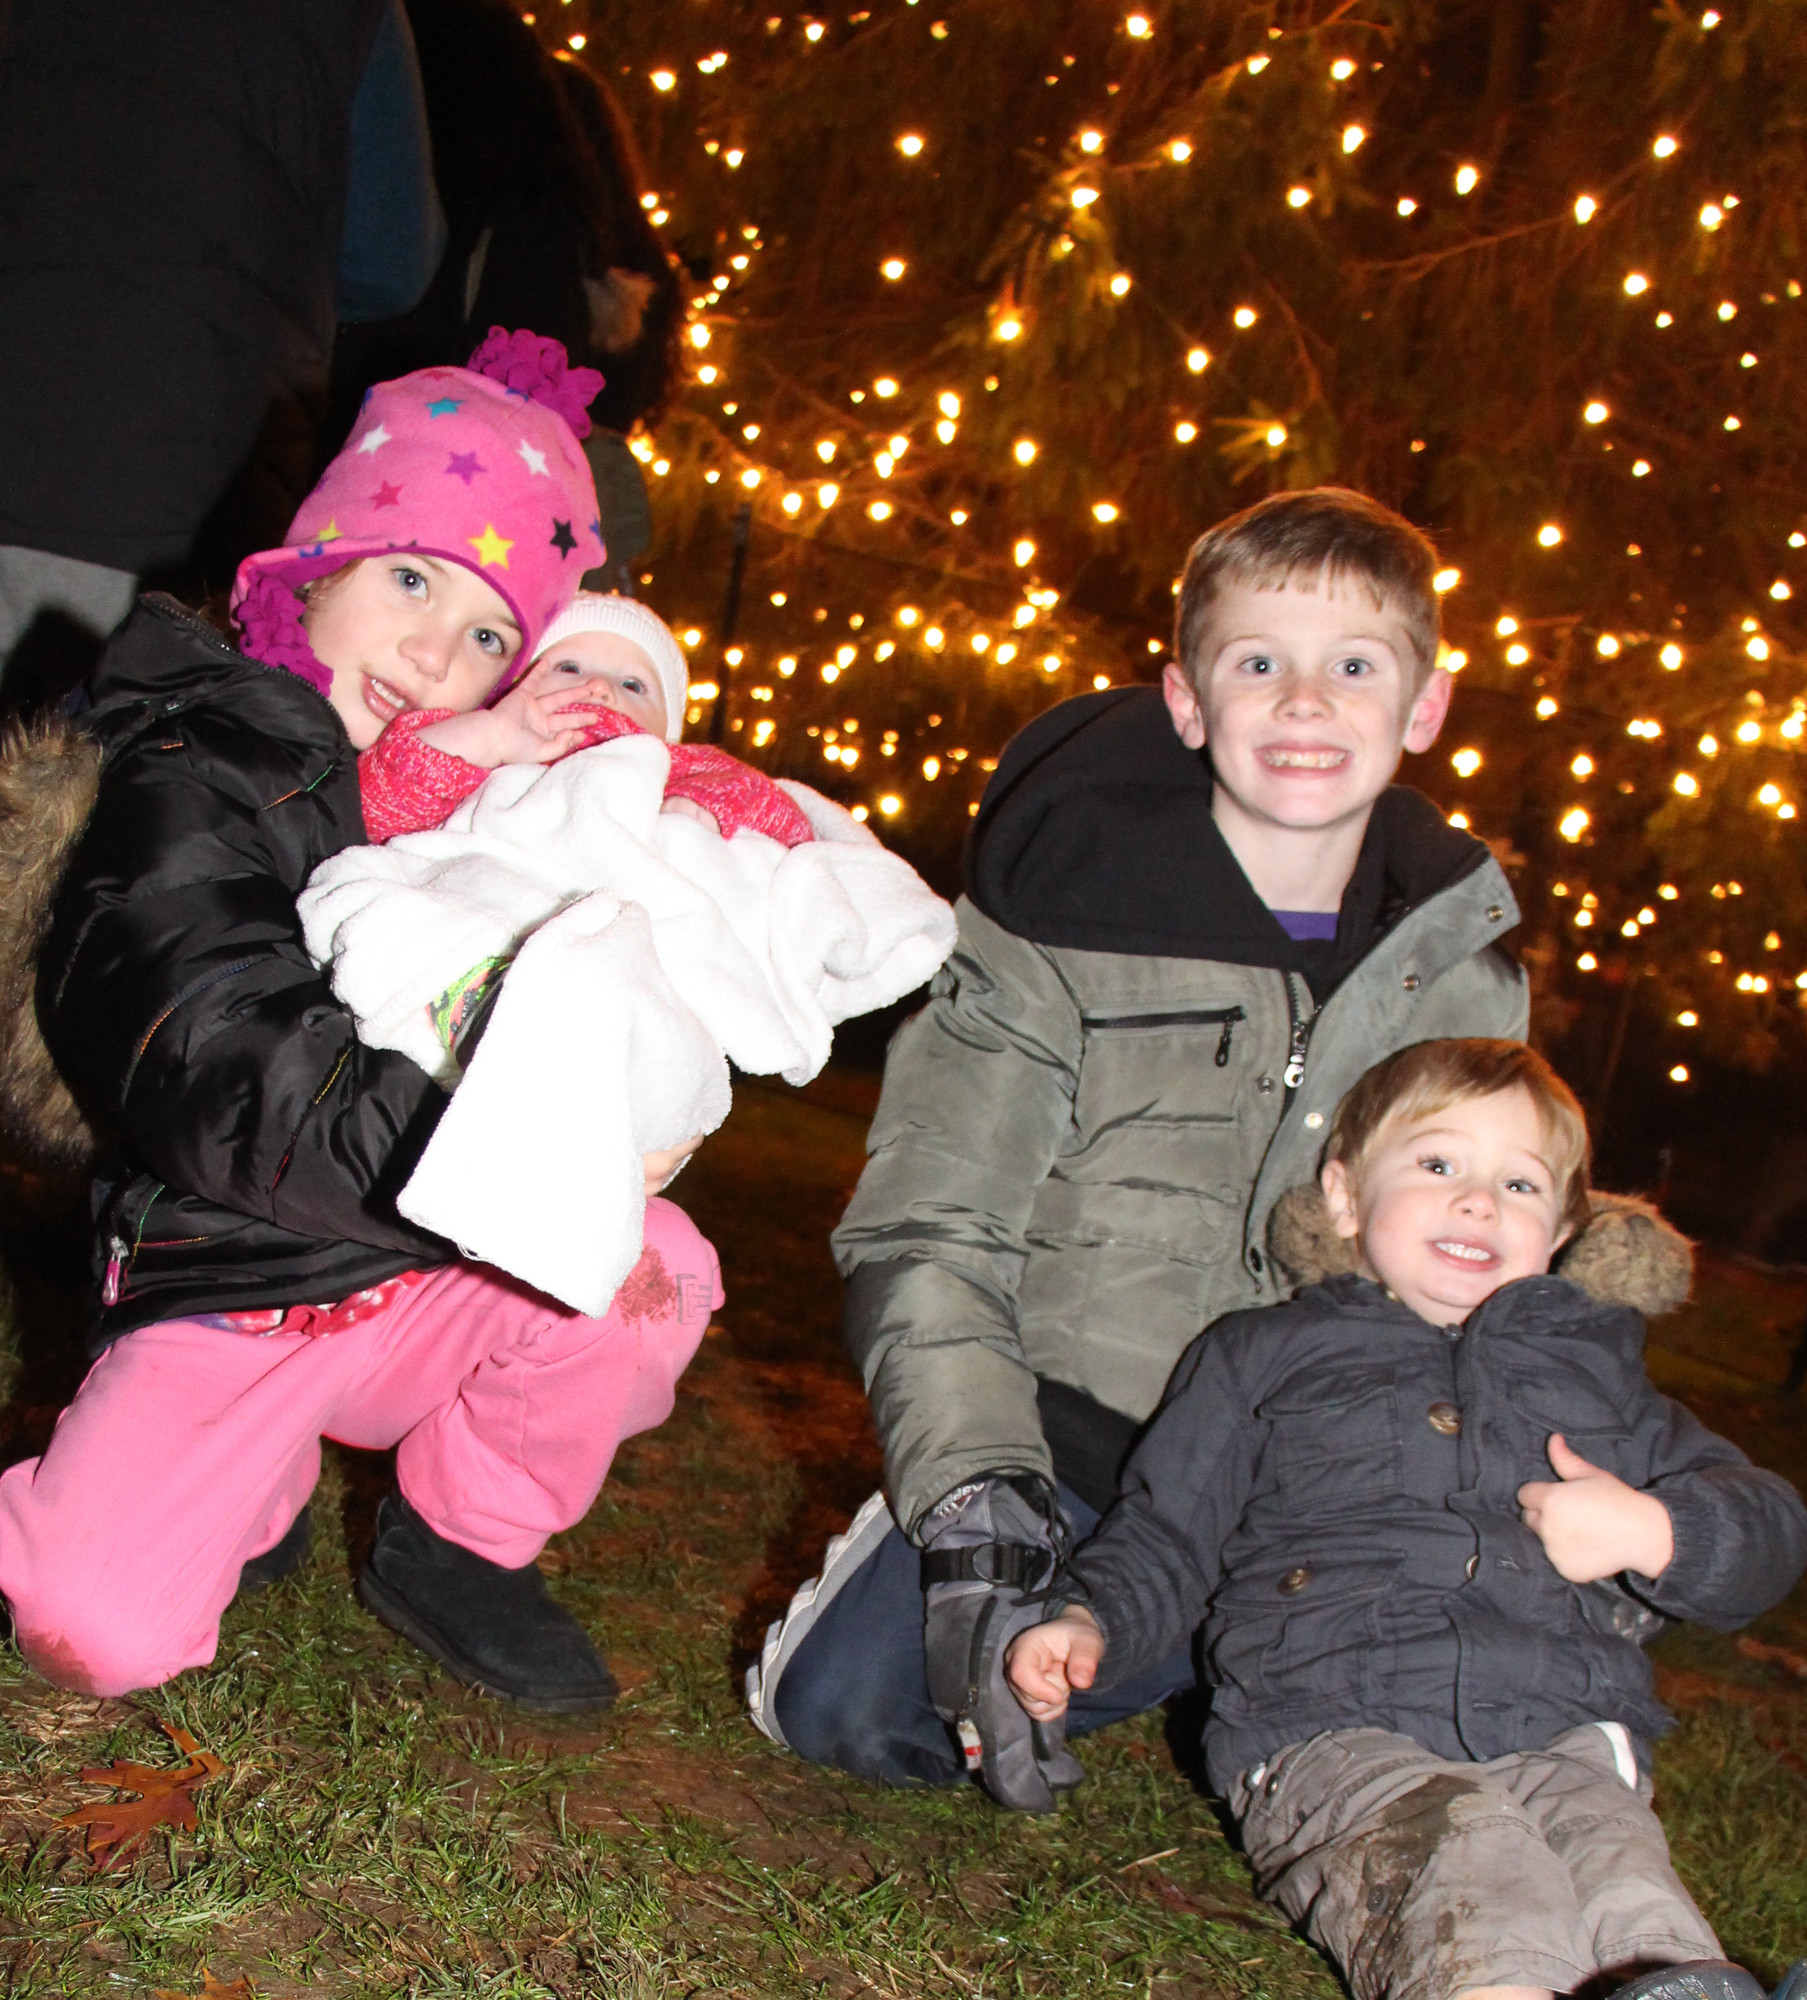 Kaitlyn Ganly, 6, was joined by her 3-month-old cousin, Mairead Halliday, brother, Ryan, 8, and cousin, Nolan Halliday.